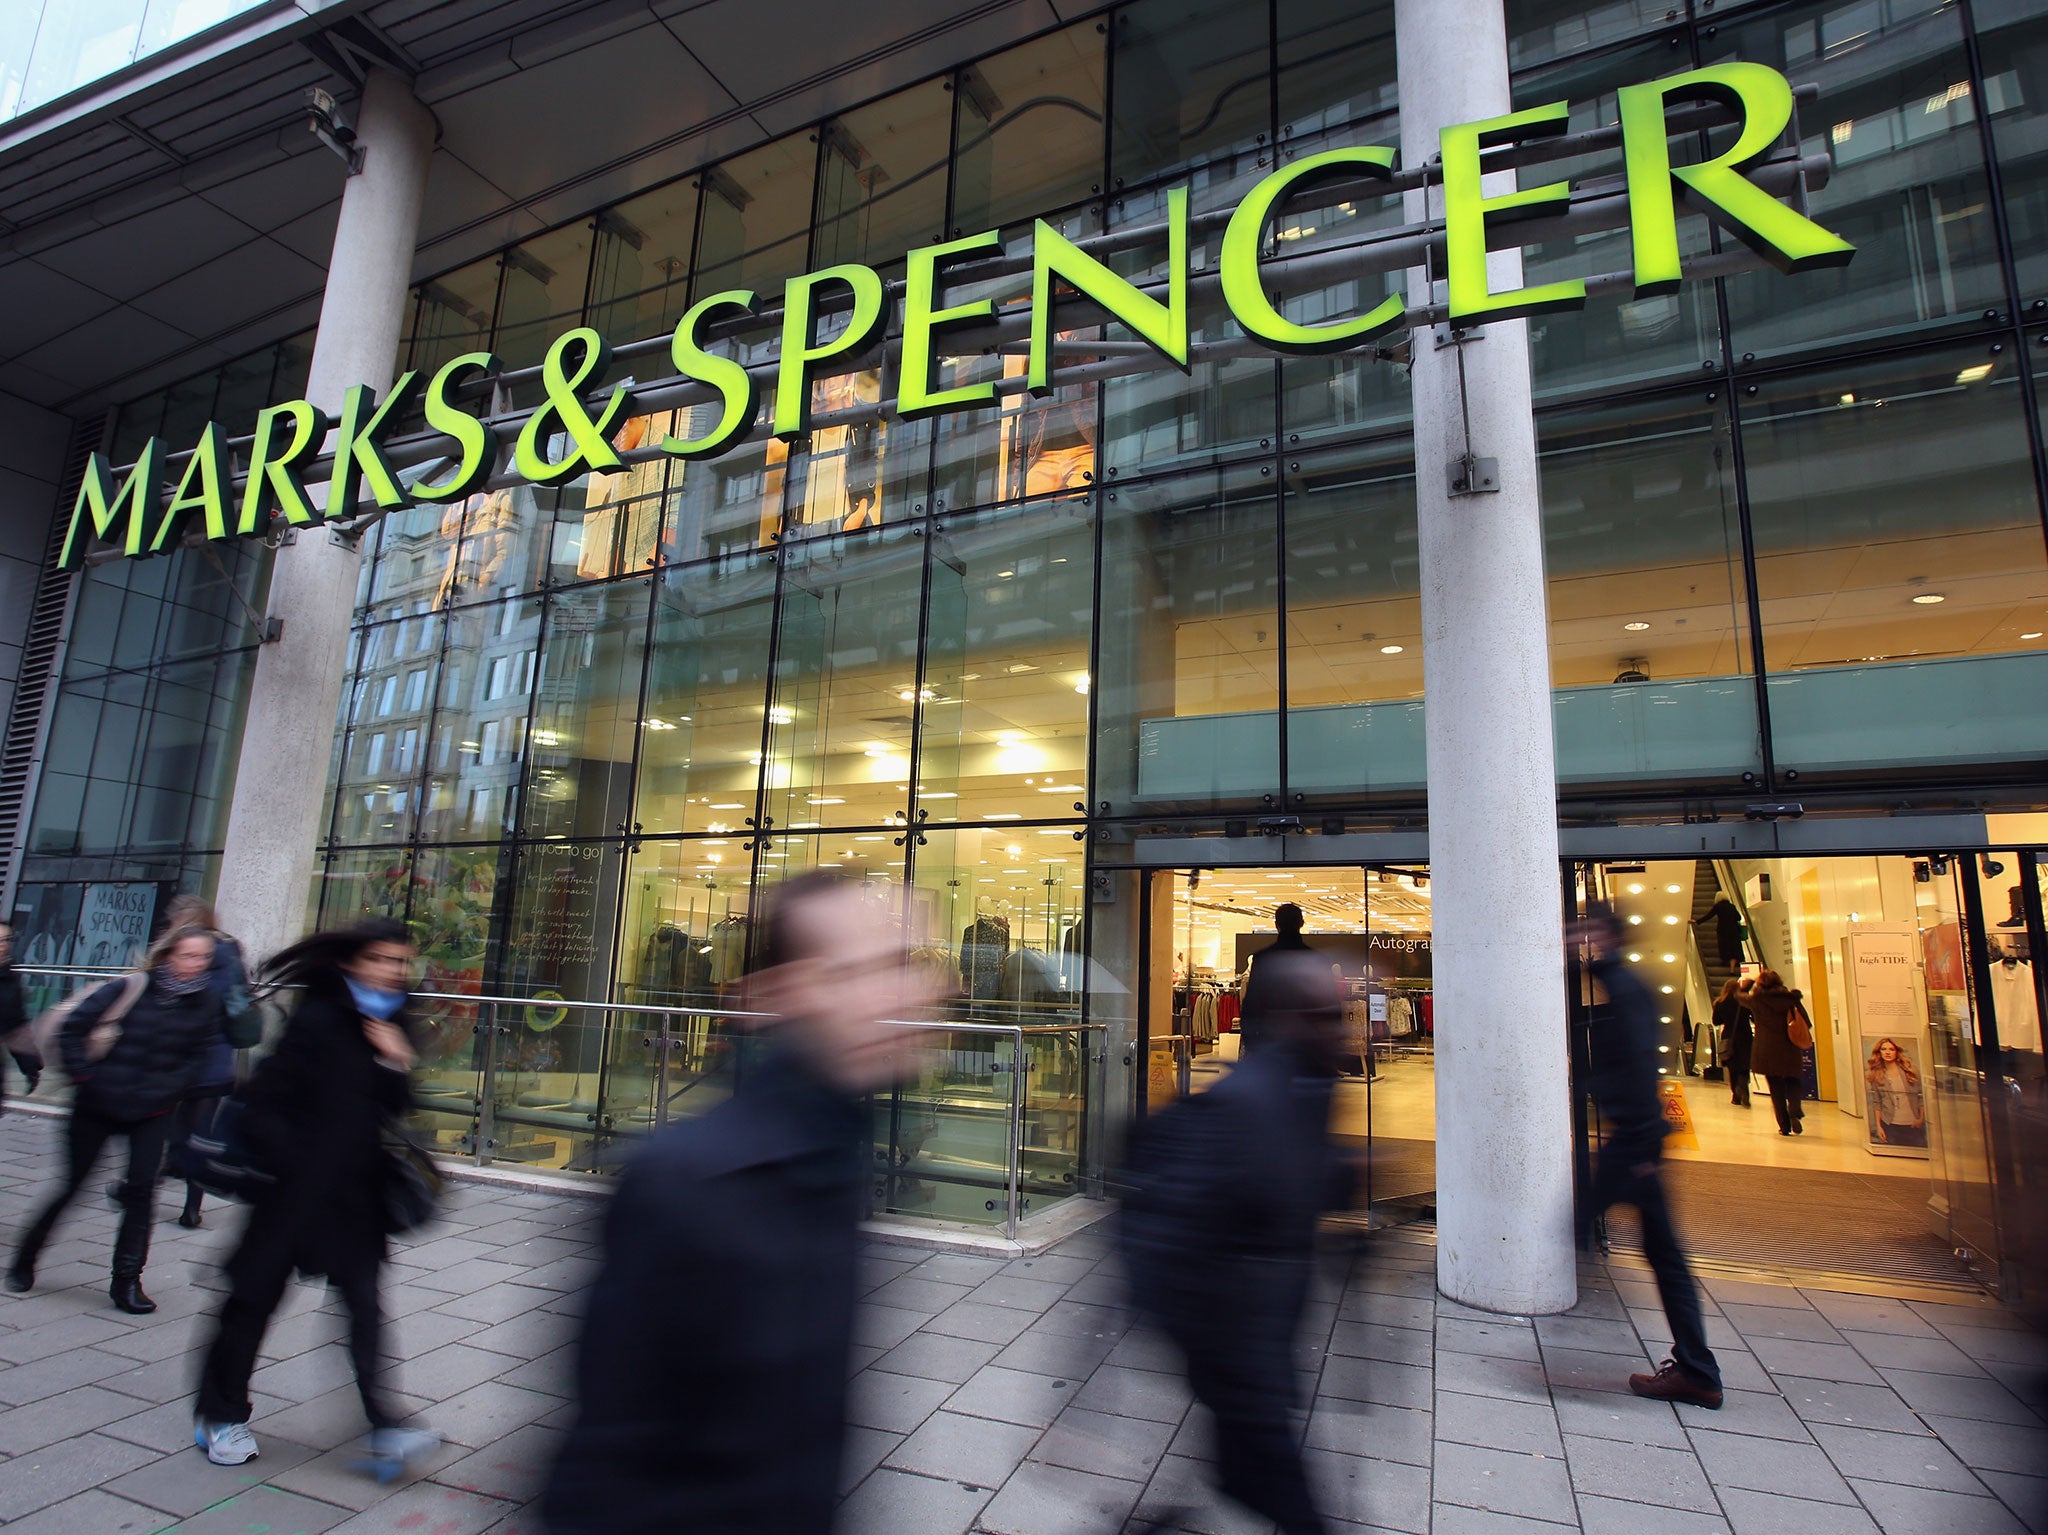 Members of the public walk past a branch of Marks & Spencer on January 7, 2014 in London, England